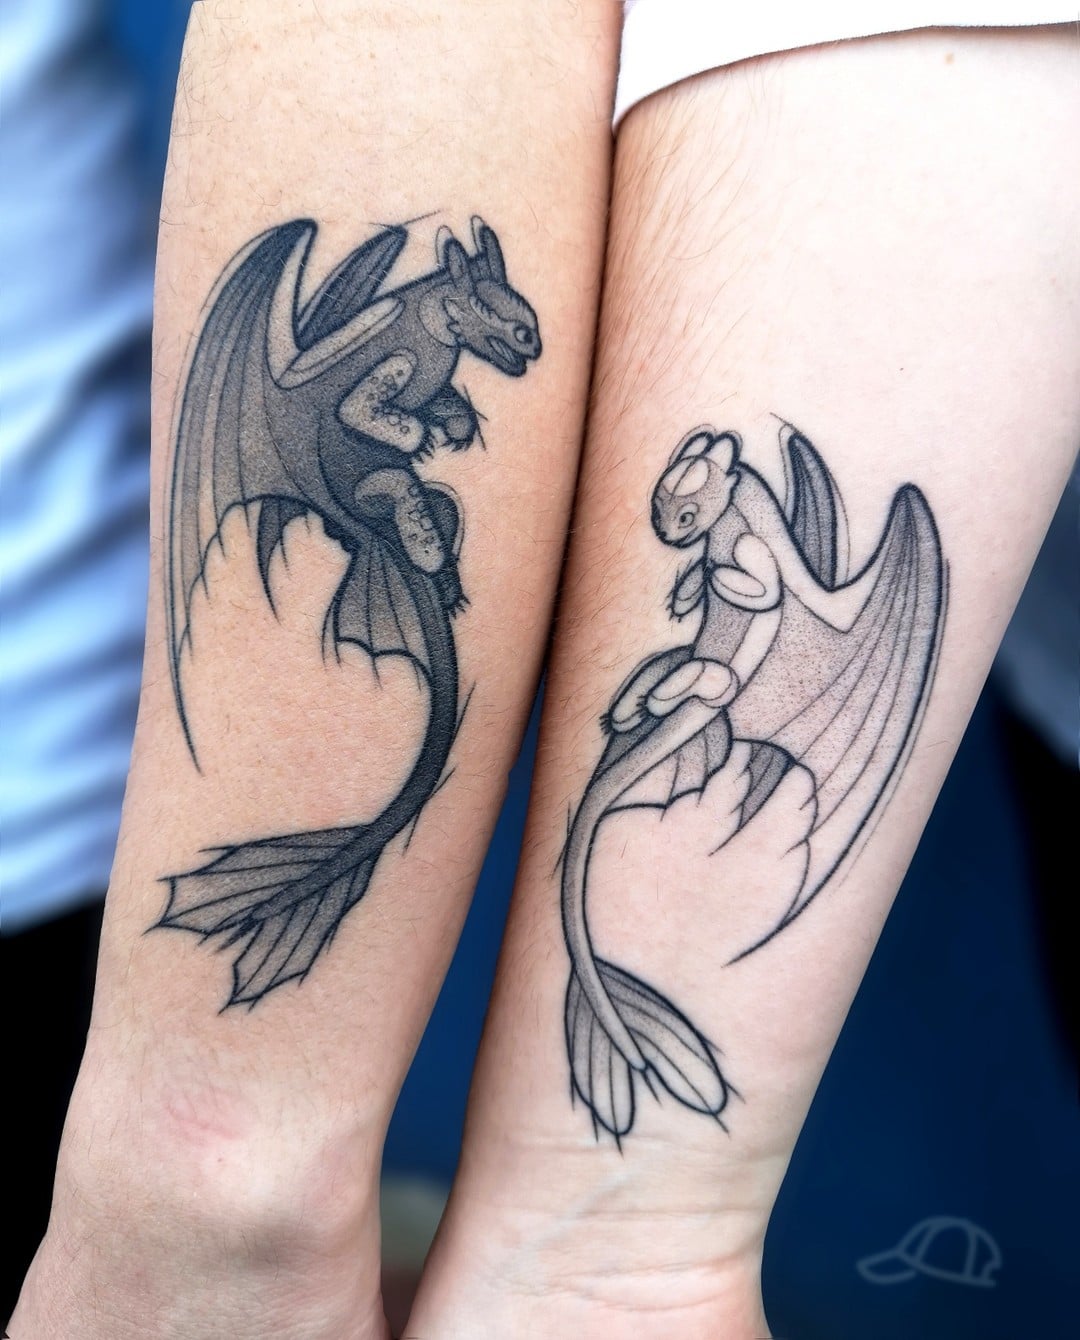 Toothless tattoo located on the upper arm.